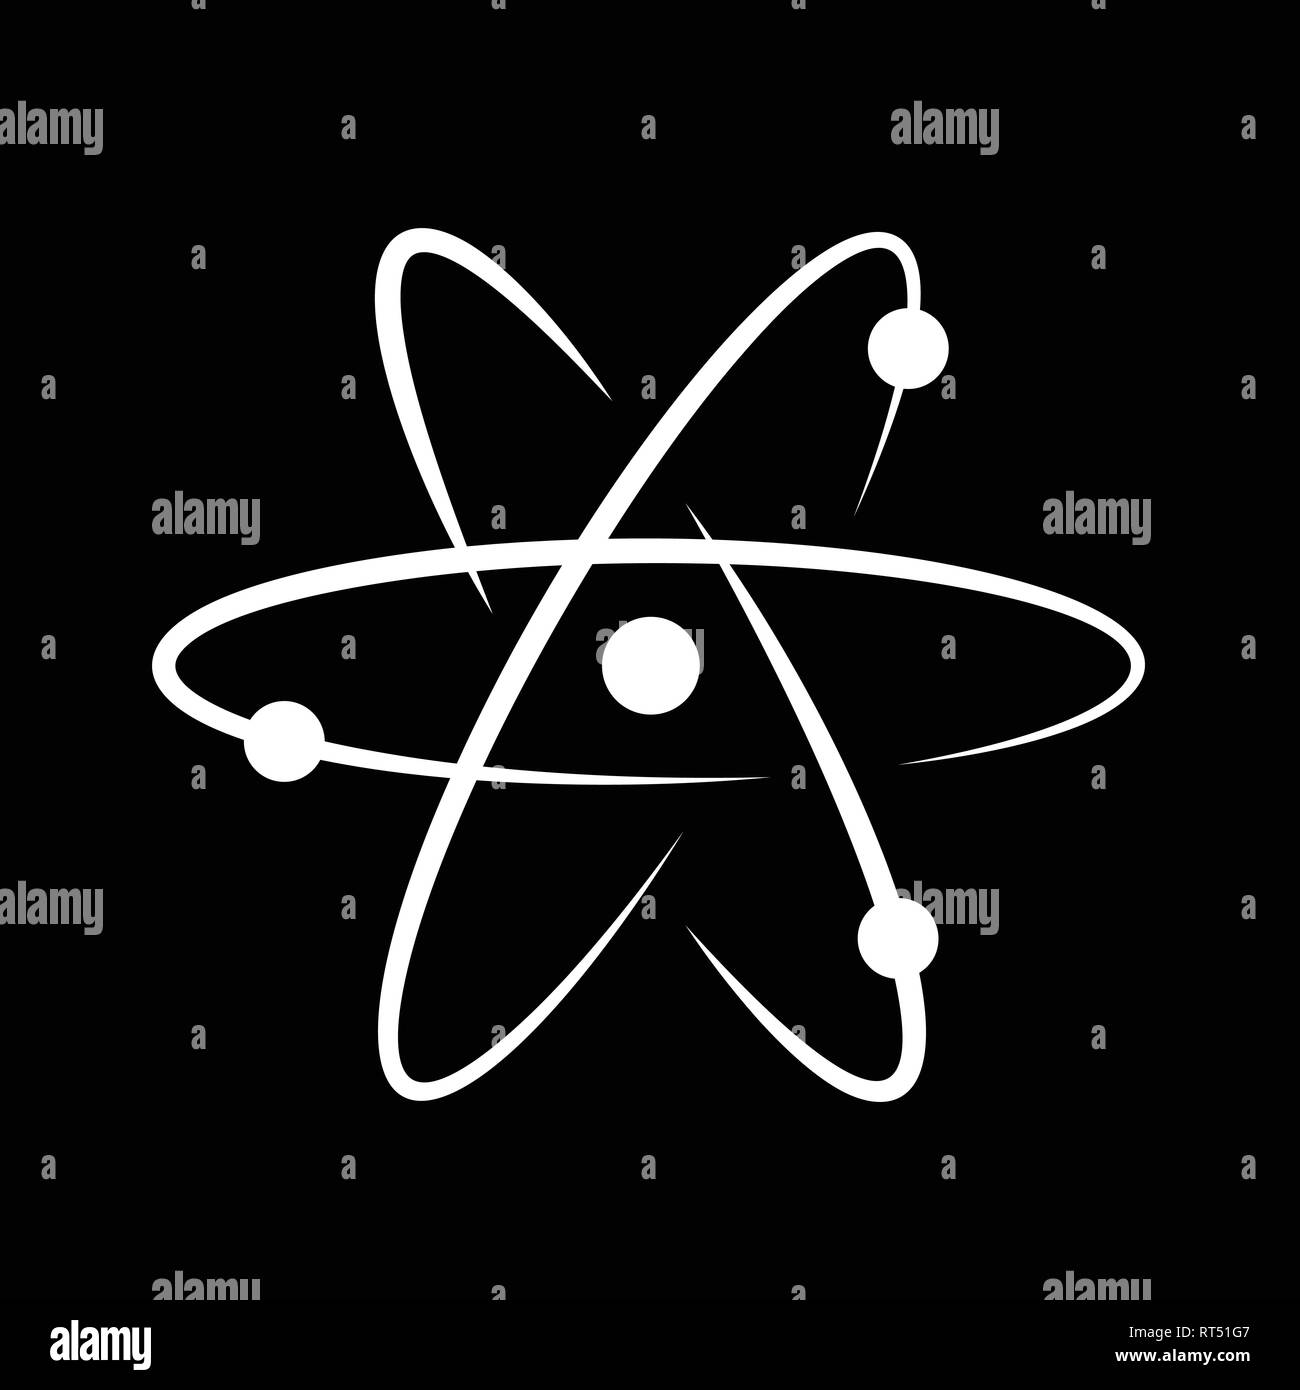 Atom sign icon. Science symbol isolated for design Stock Vector